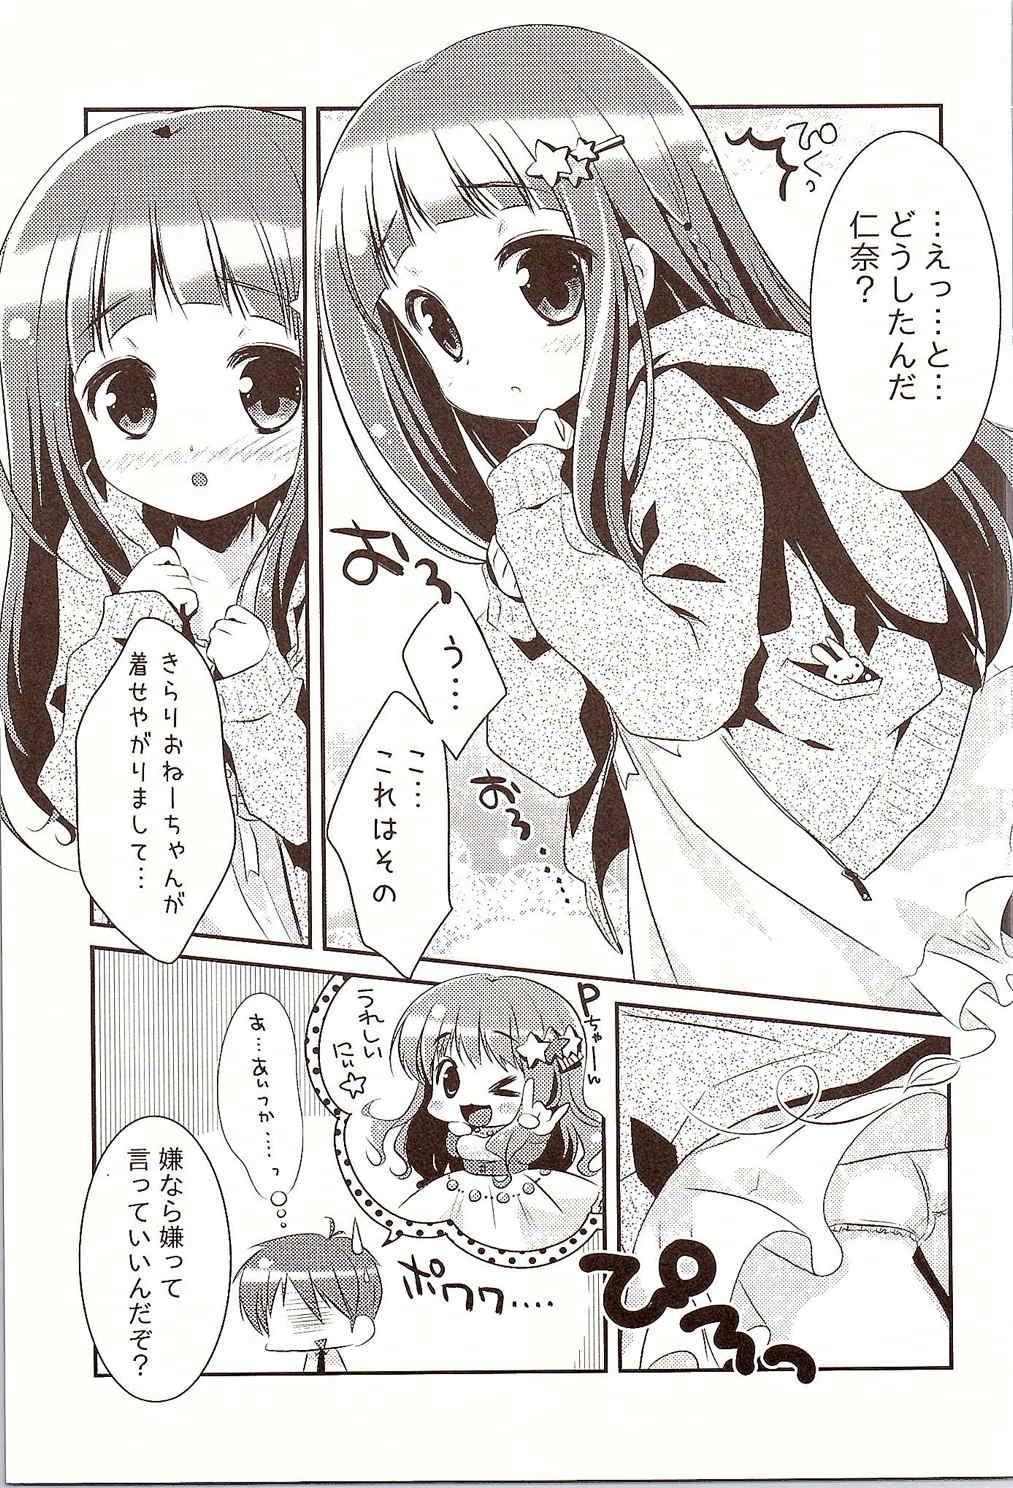 Action Nina-chan to, Issho. - The idolmaster 18 Porn - Page 4